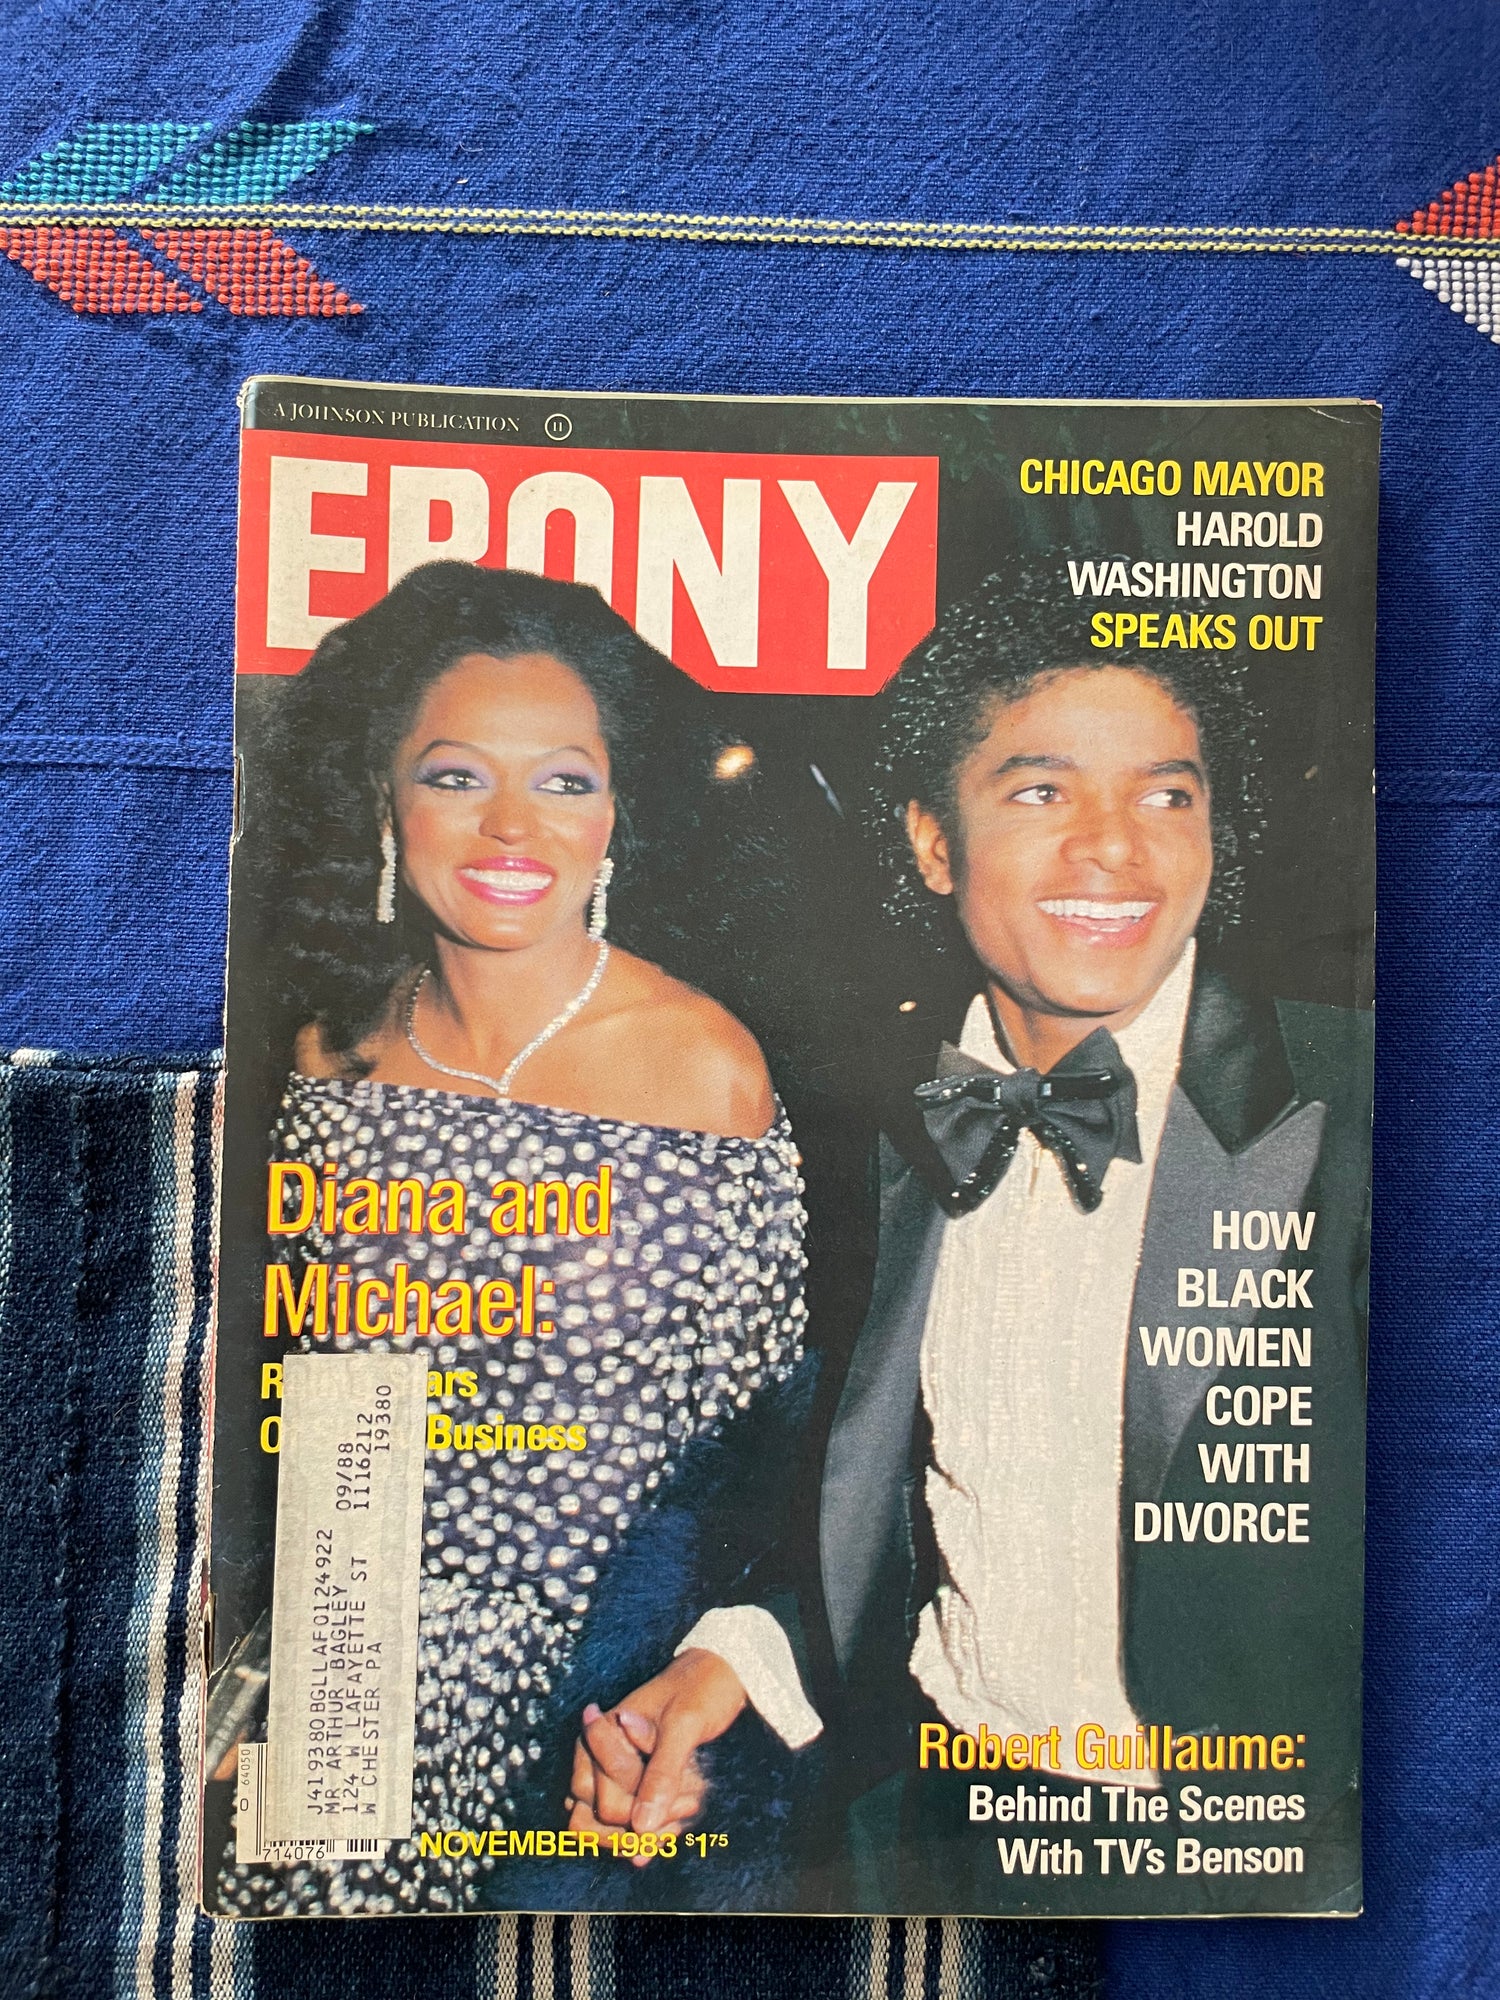 Vintage Ebony Magazine Issues // Assorted Covers (Please Select)